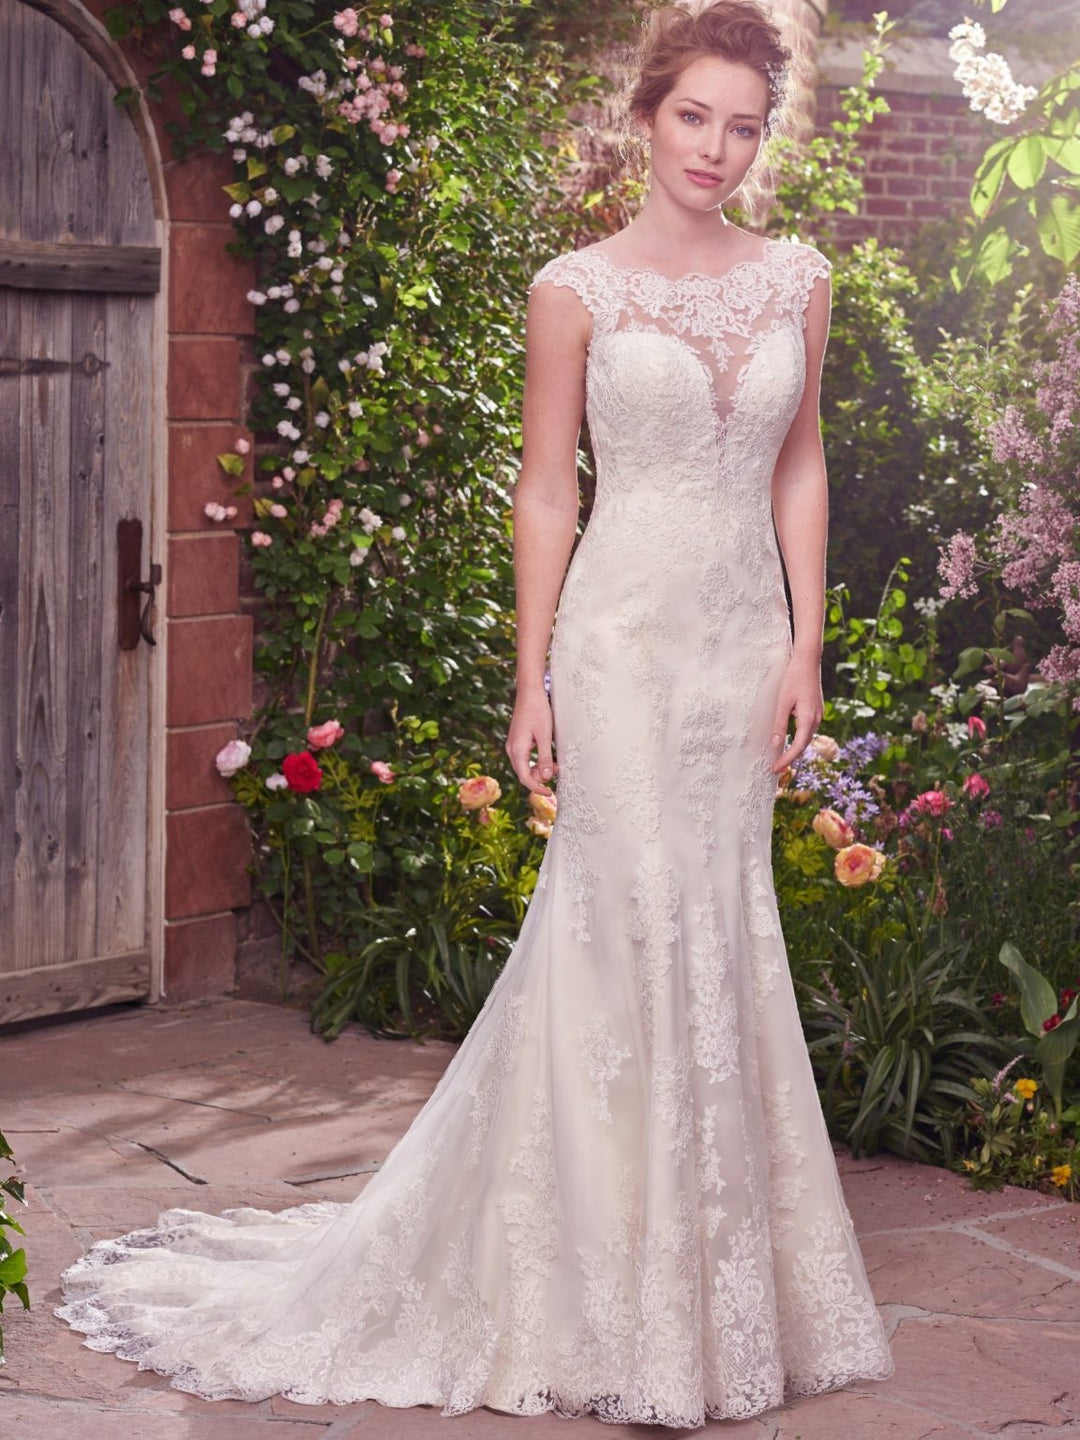 The 'Julie' Gown by Rebecca Ingram Size 8